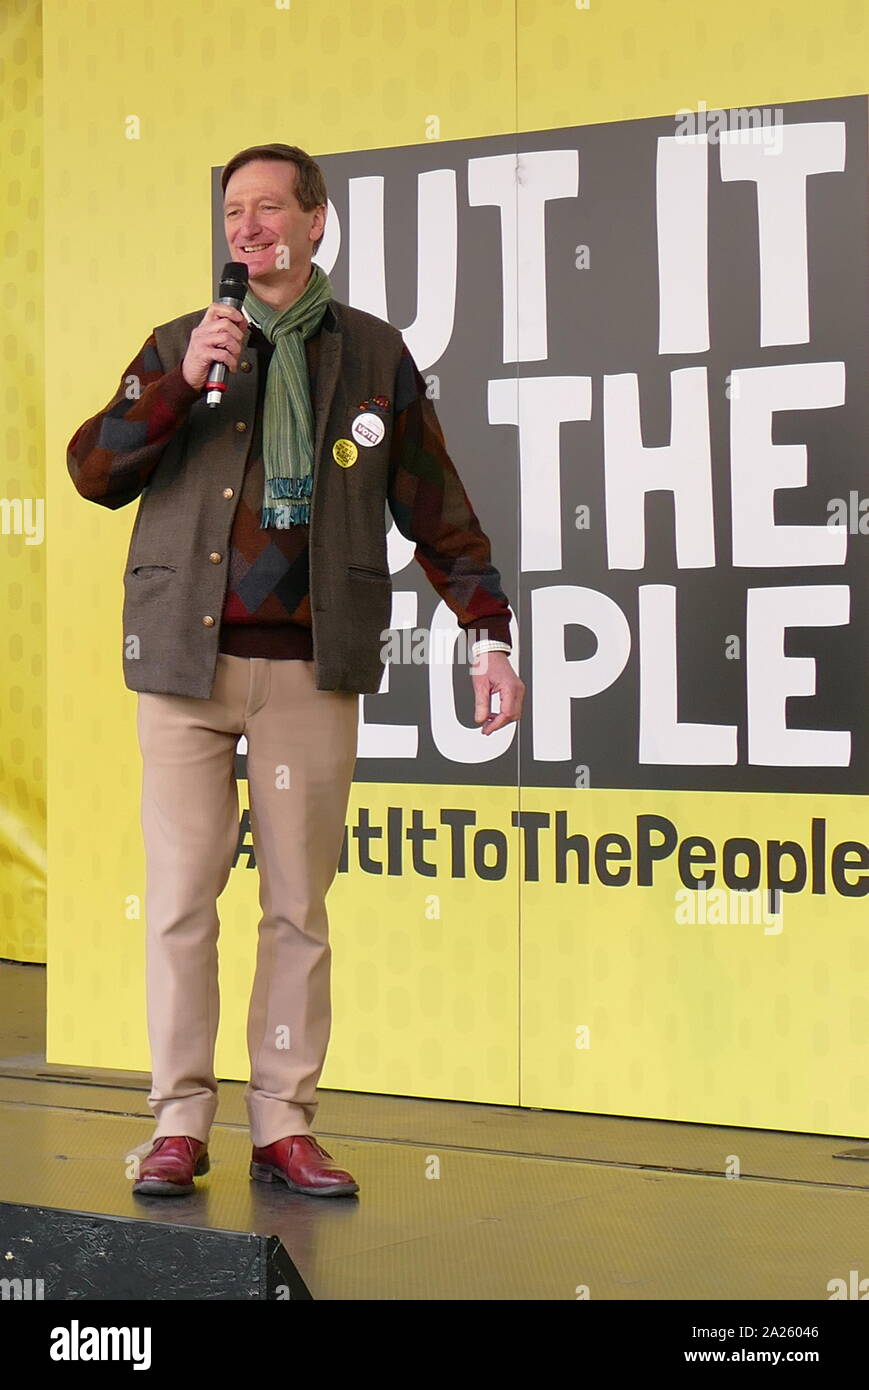 Dominic Grieve, British Conservative politician, addresses the 'People's Vote' march in Parliament Square, London. The People's Vote march took place in London on 23 March 2019 as part of a series of demonstrations to protest against Brexit, call for a new referendum, and ask the British Government to revoke Article 50. It brought to the capital hundreds of thousands of protestors, or over a million people according to the organizers. Stock Photo